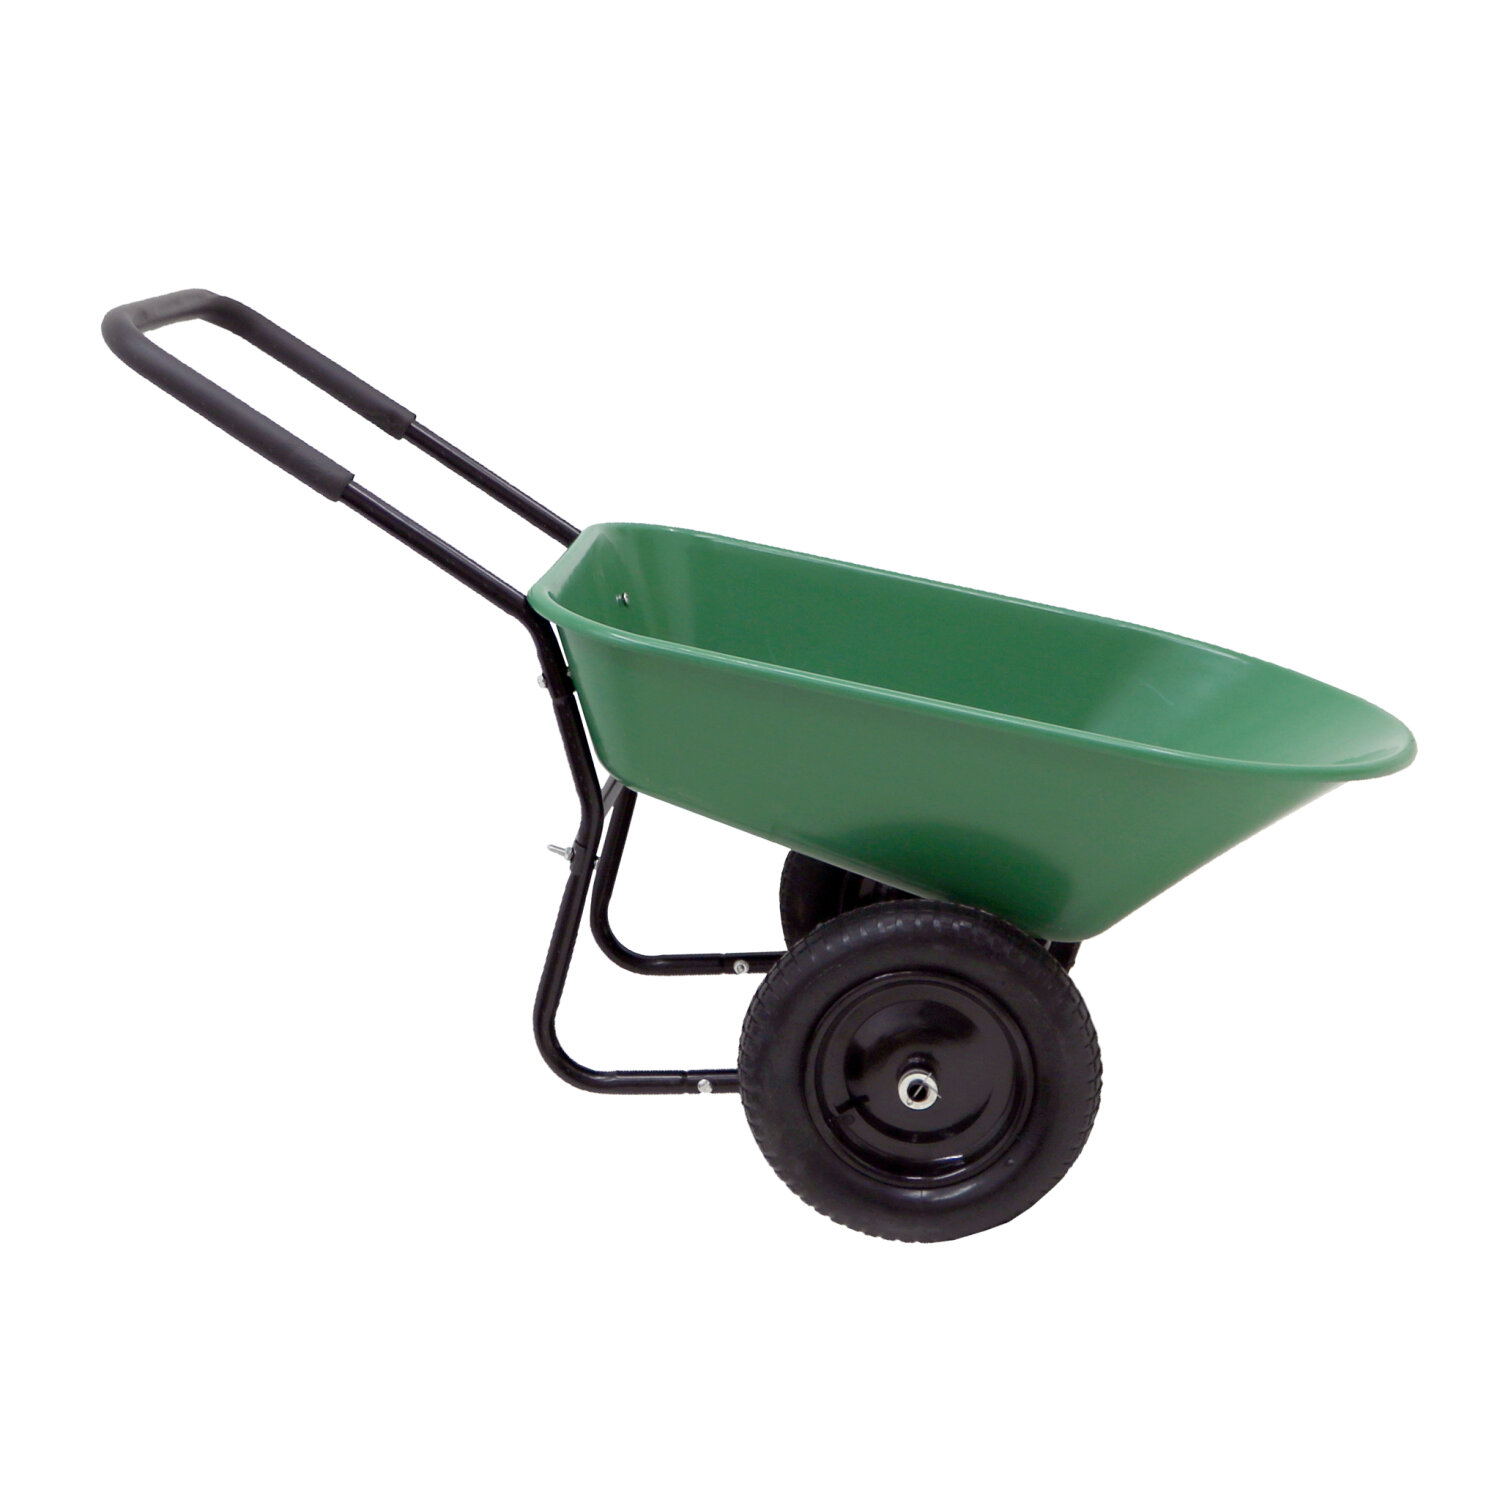 PINK WHEEL BARROW REPLACEMENT PLASTIC BODY 110 LITRE/ NO HOLES MADE IN UK 